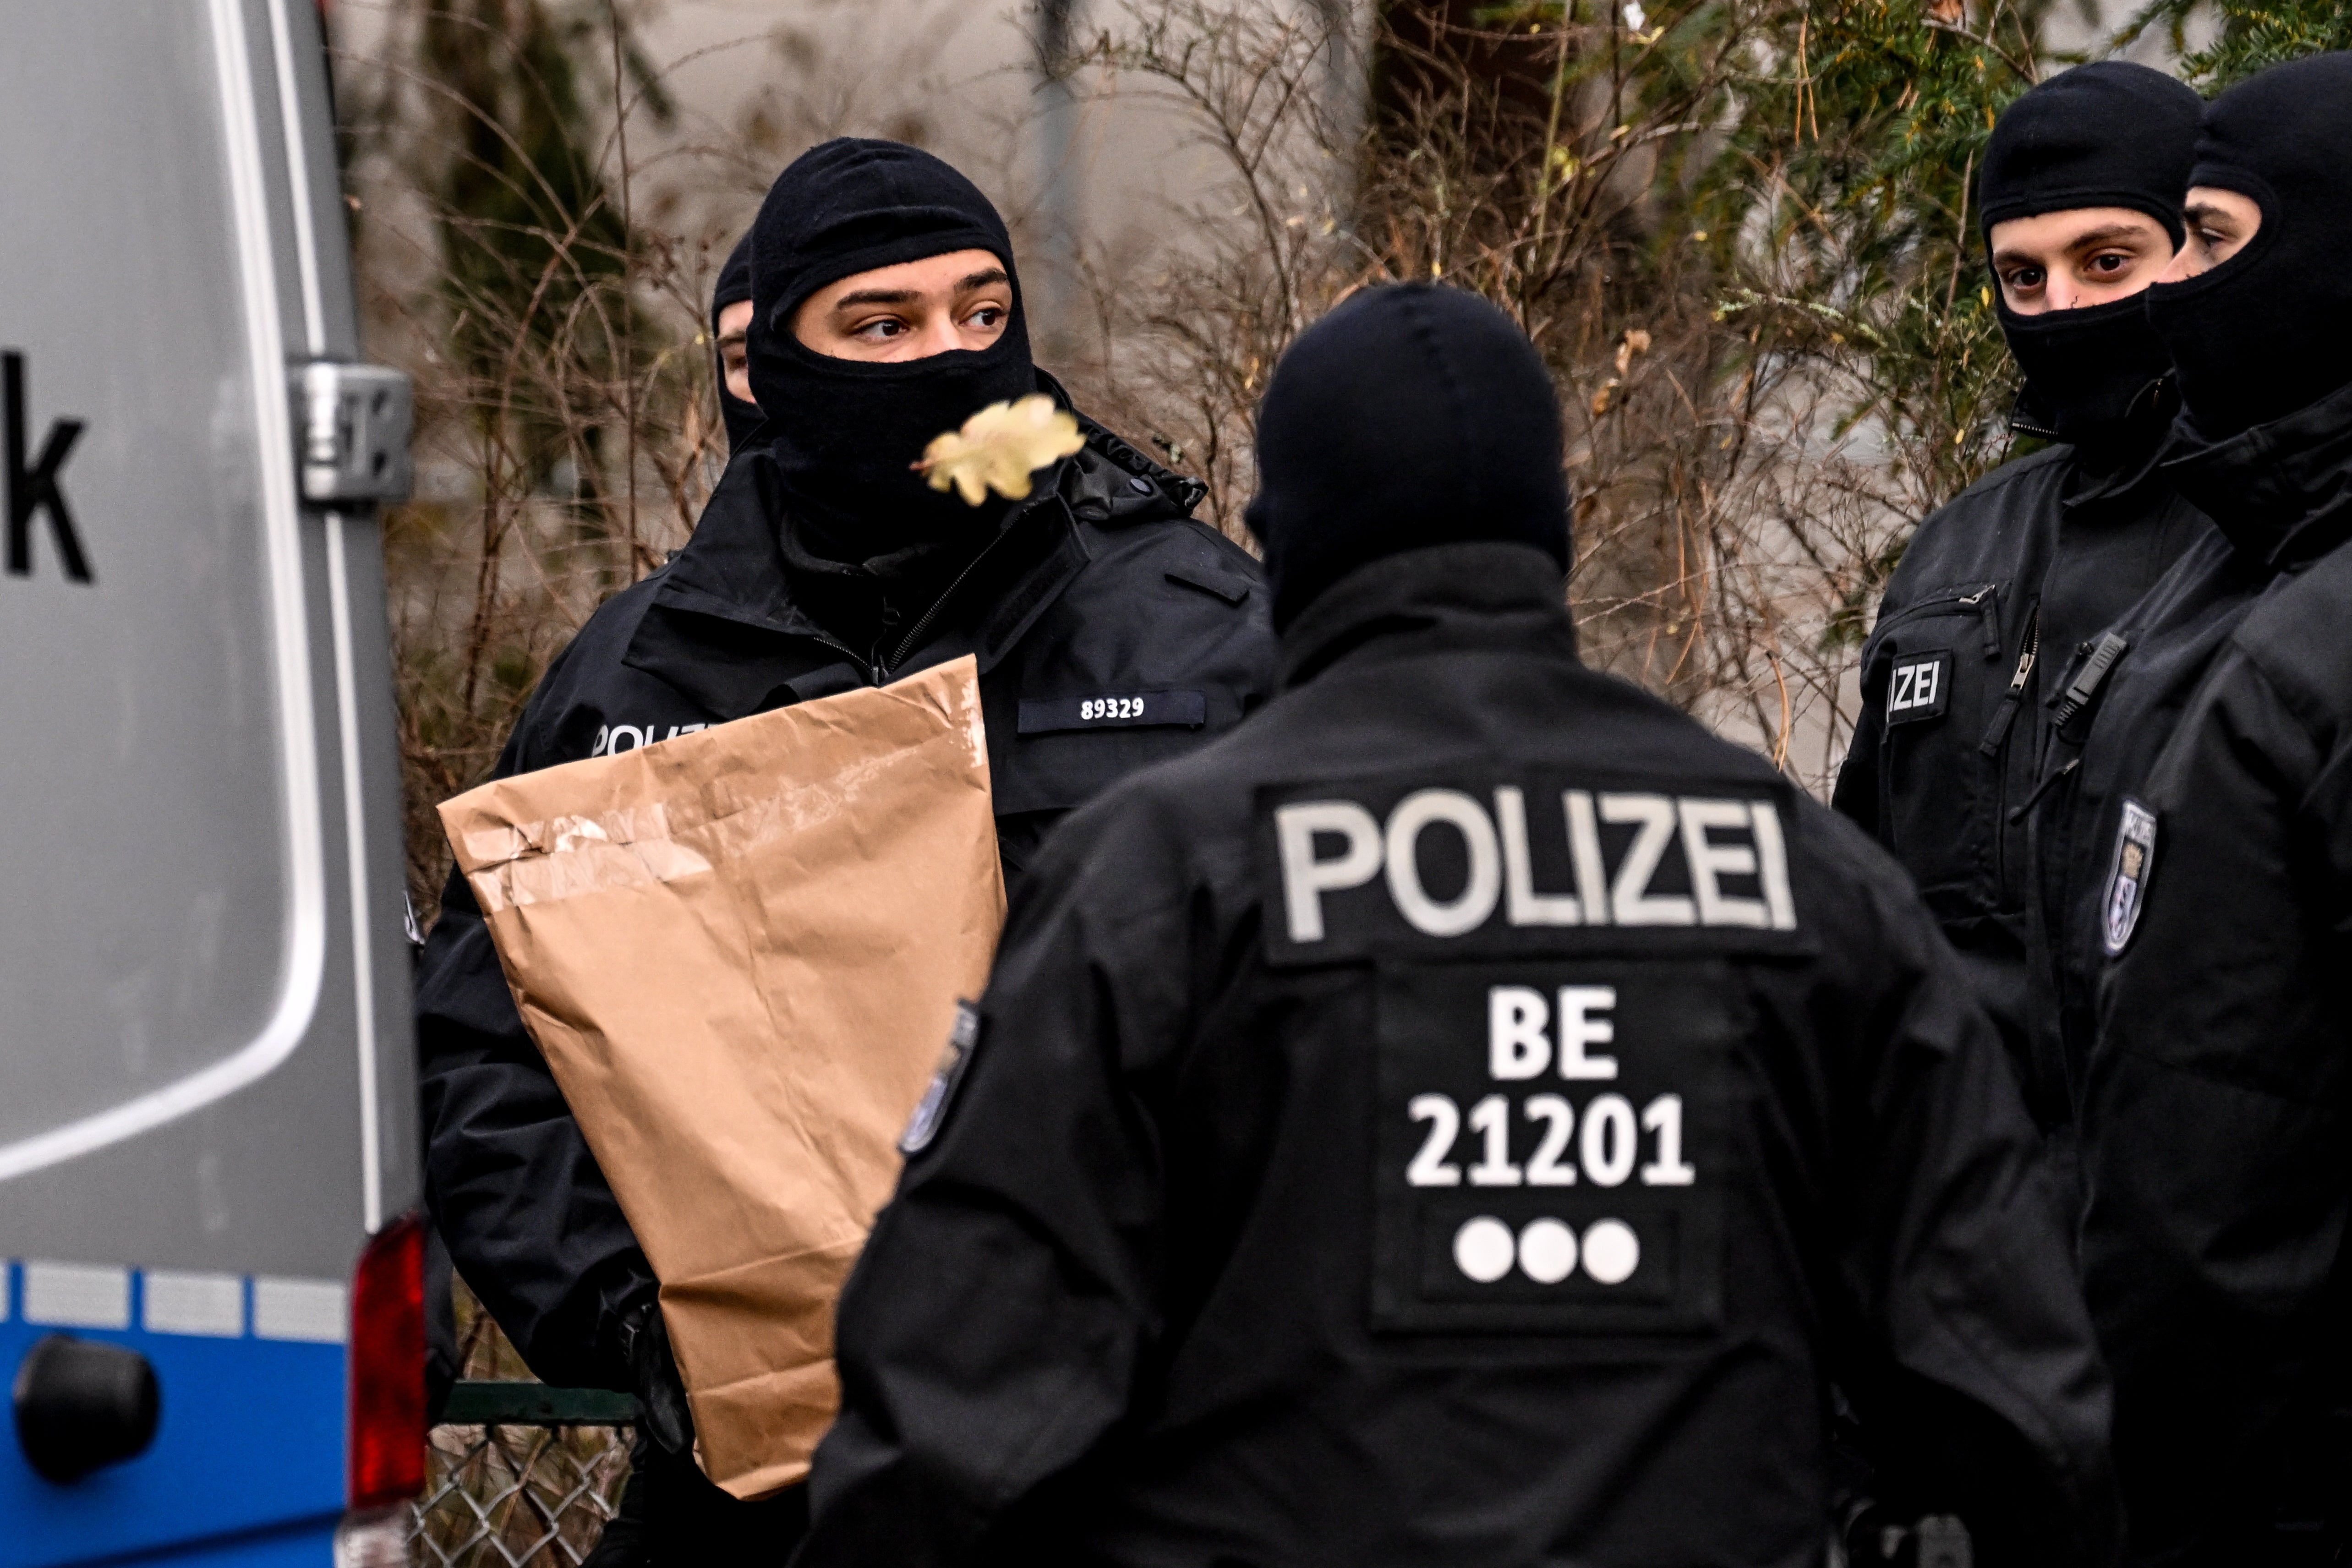 Police officers work during a raid in Berlin